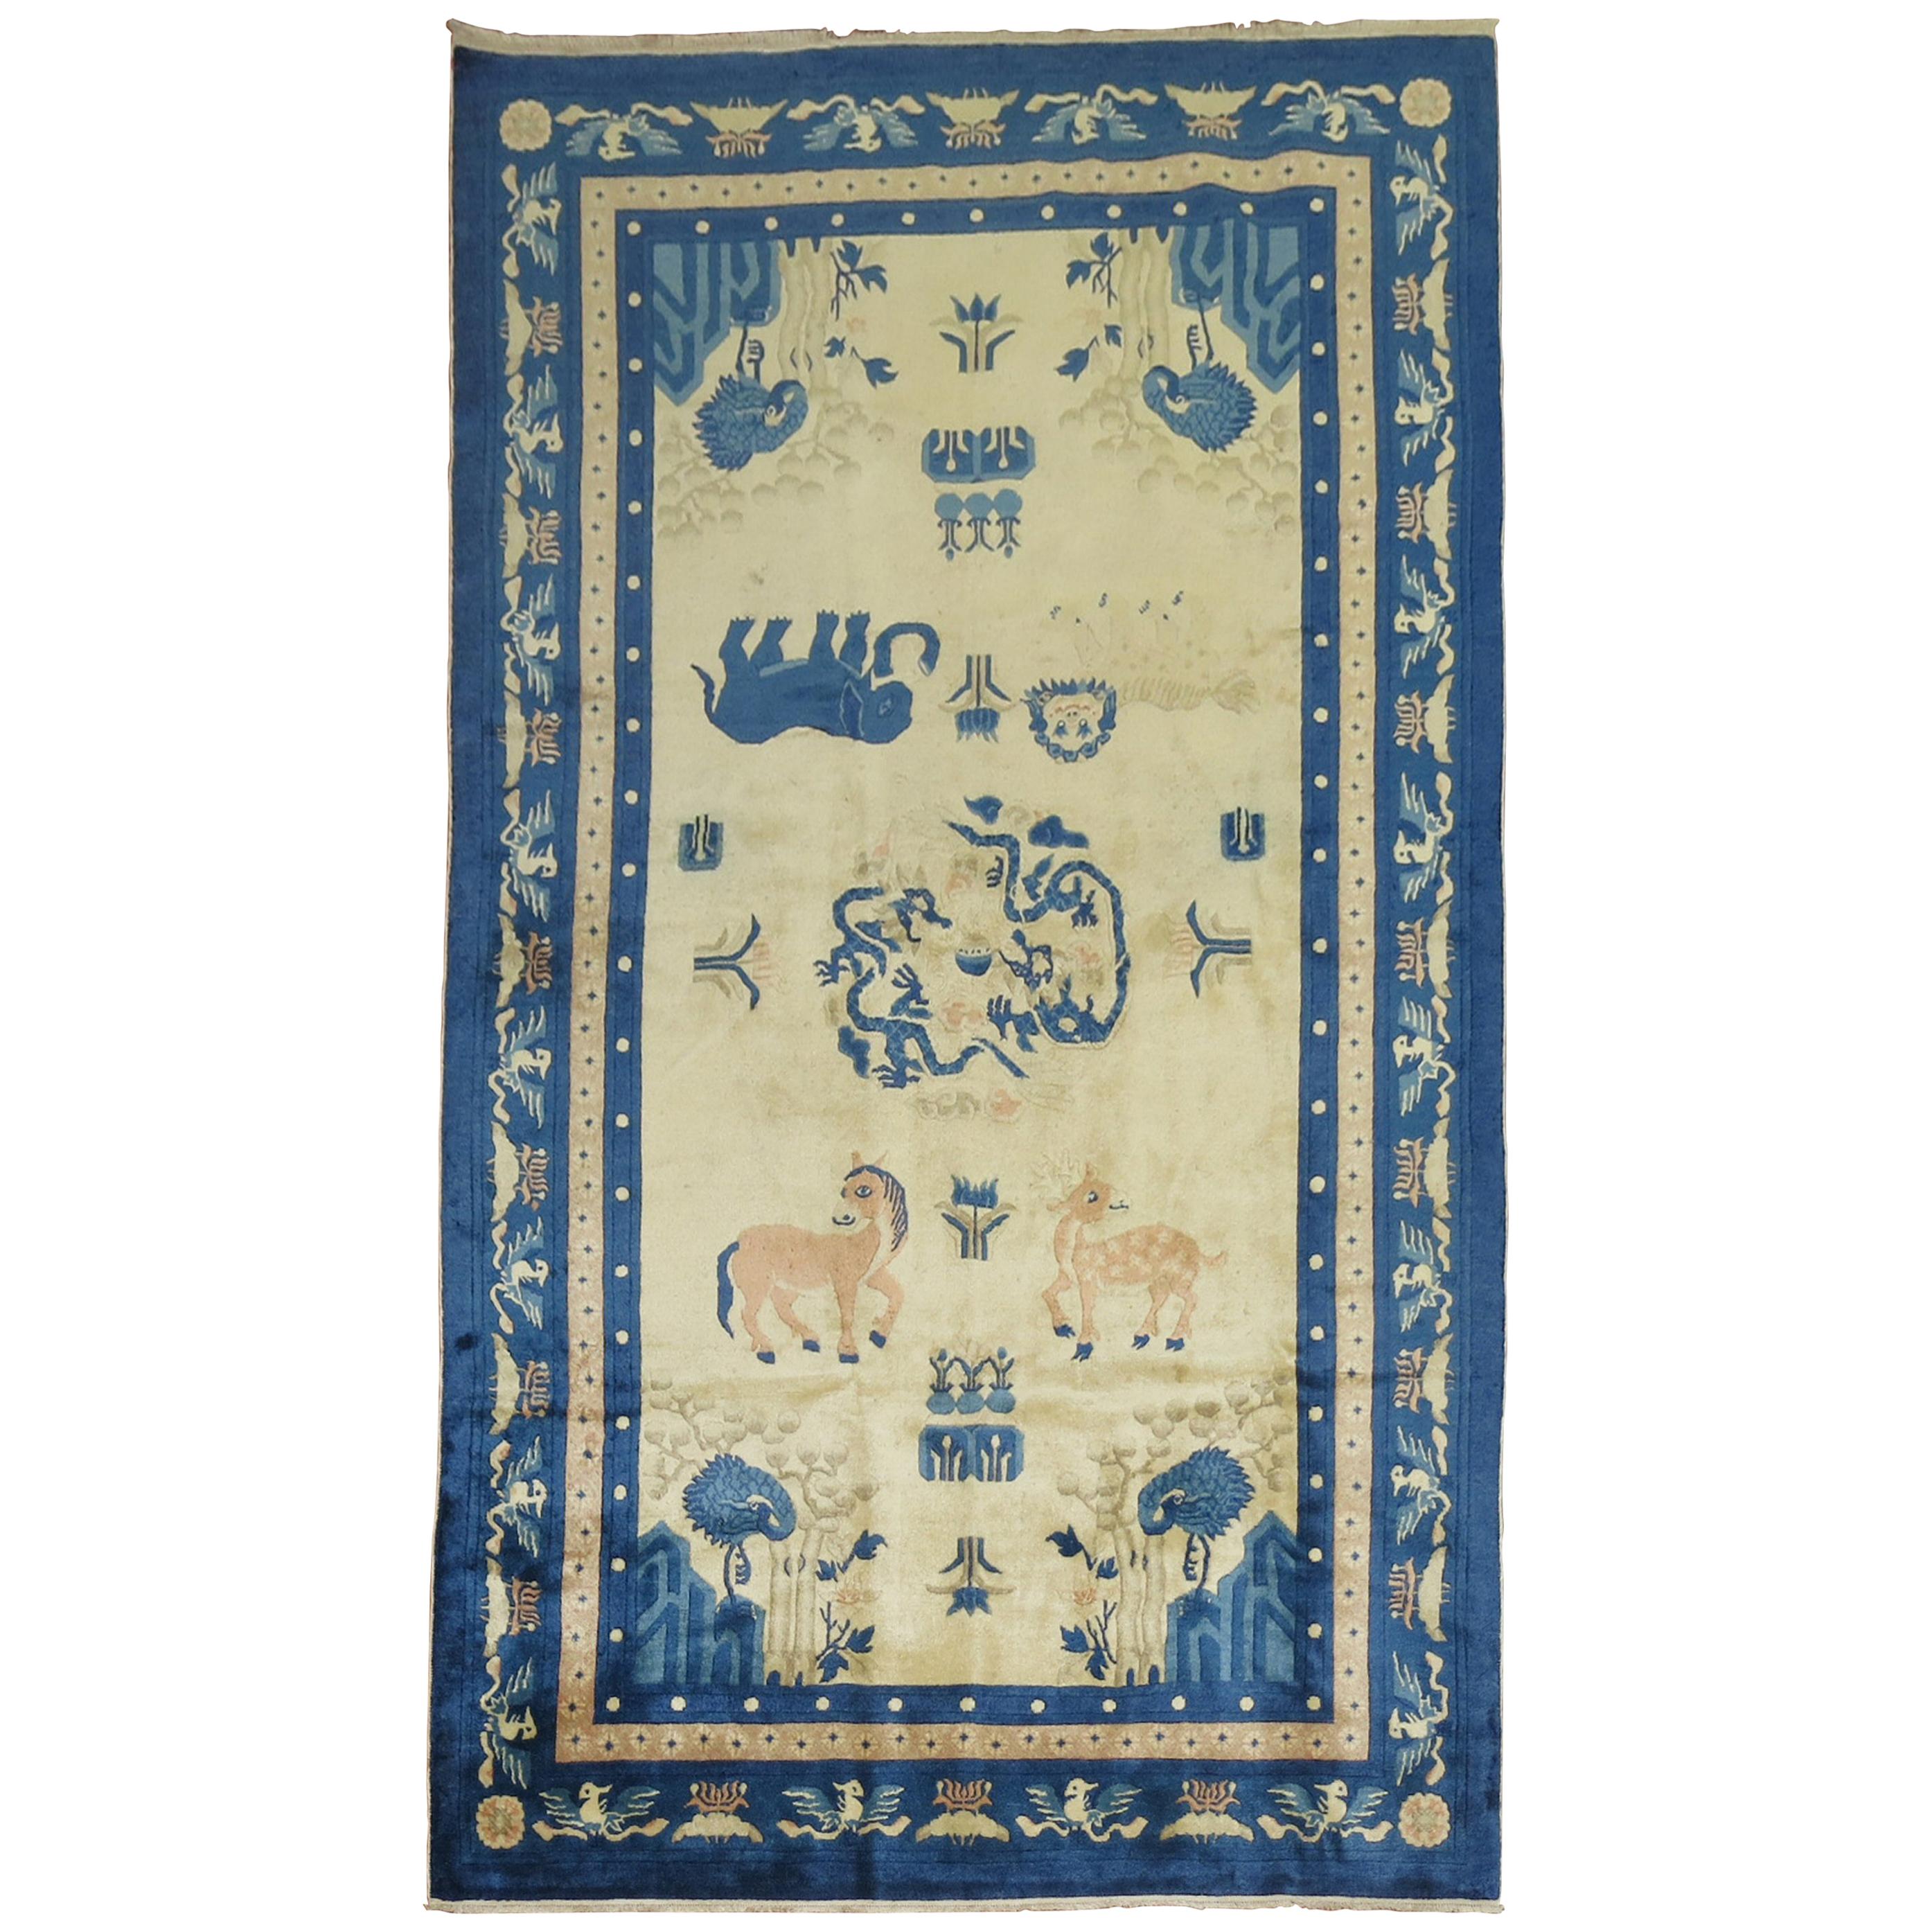 Chinese Antique Pictorial Animal Elephant Rug For Sale